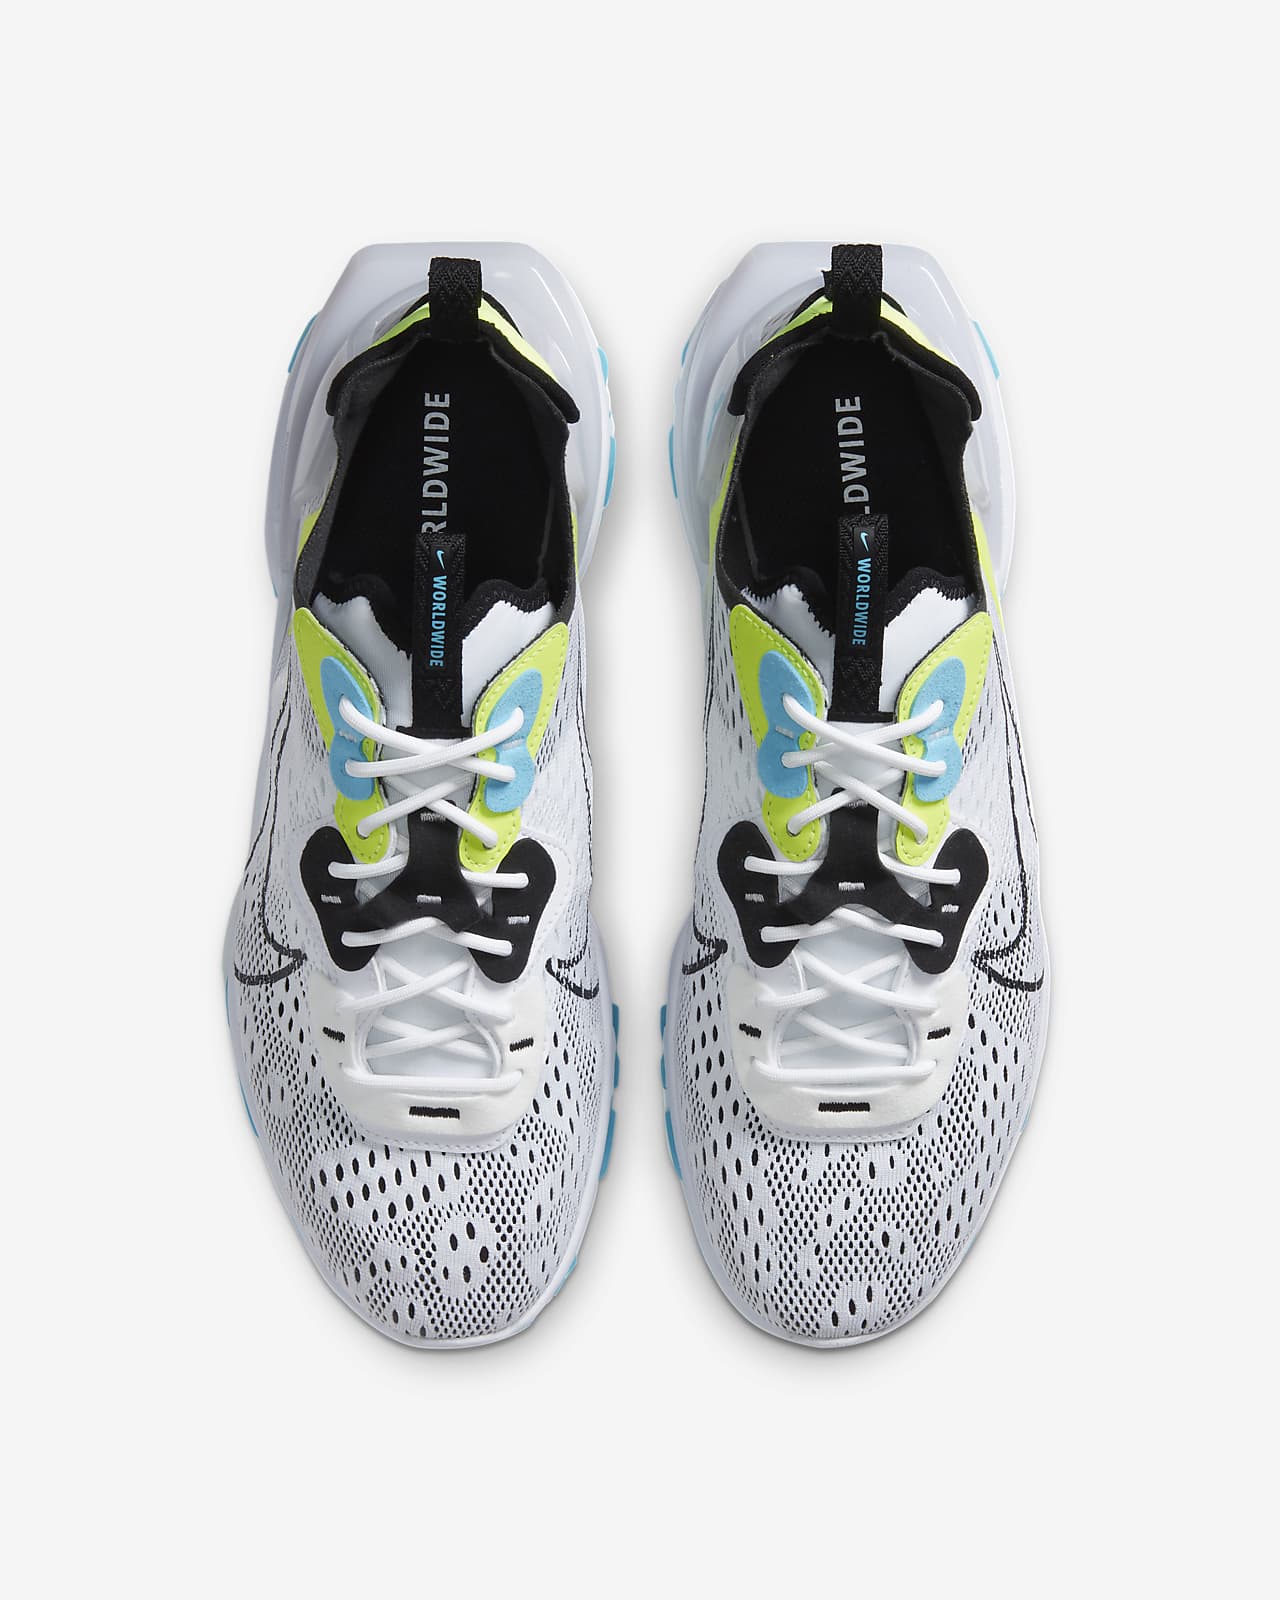 nike react vision mens trainers